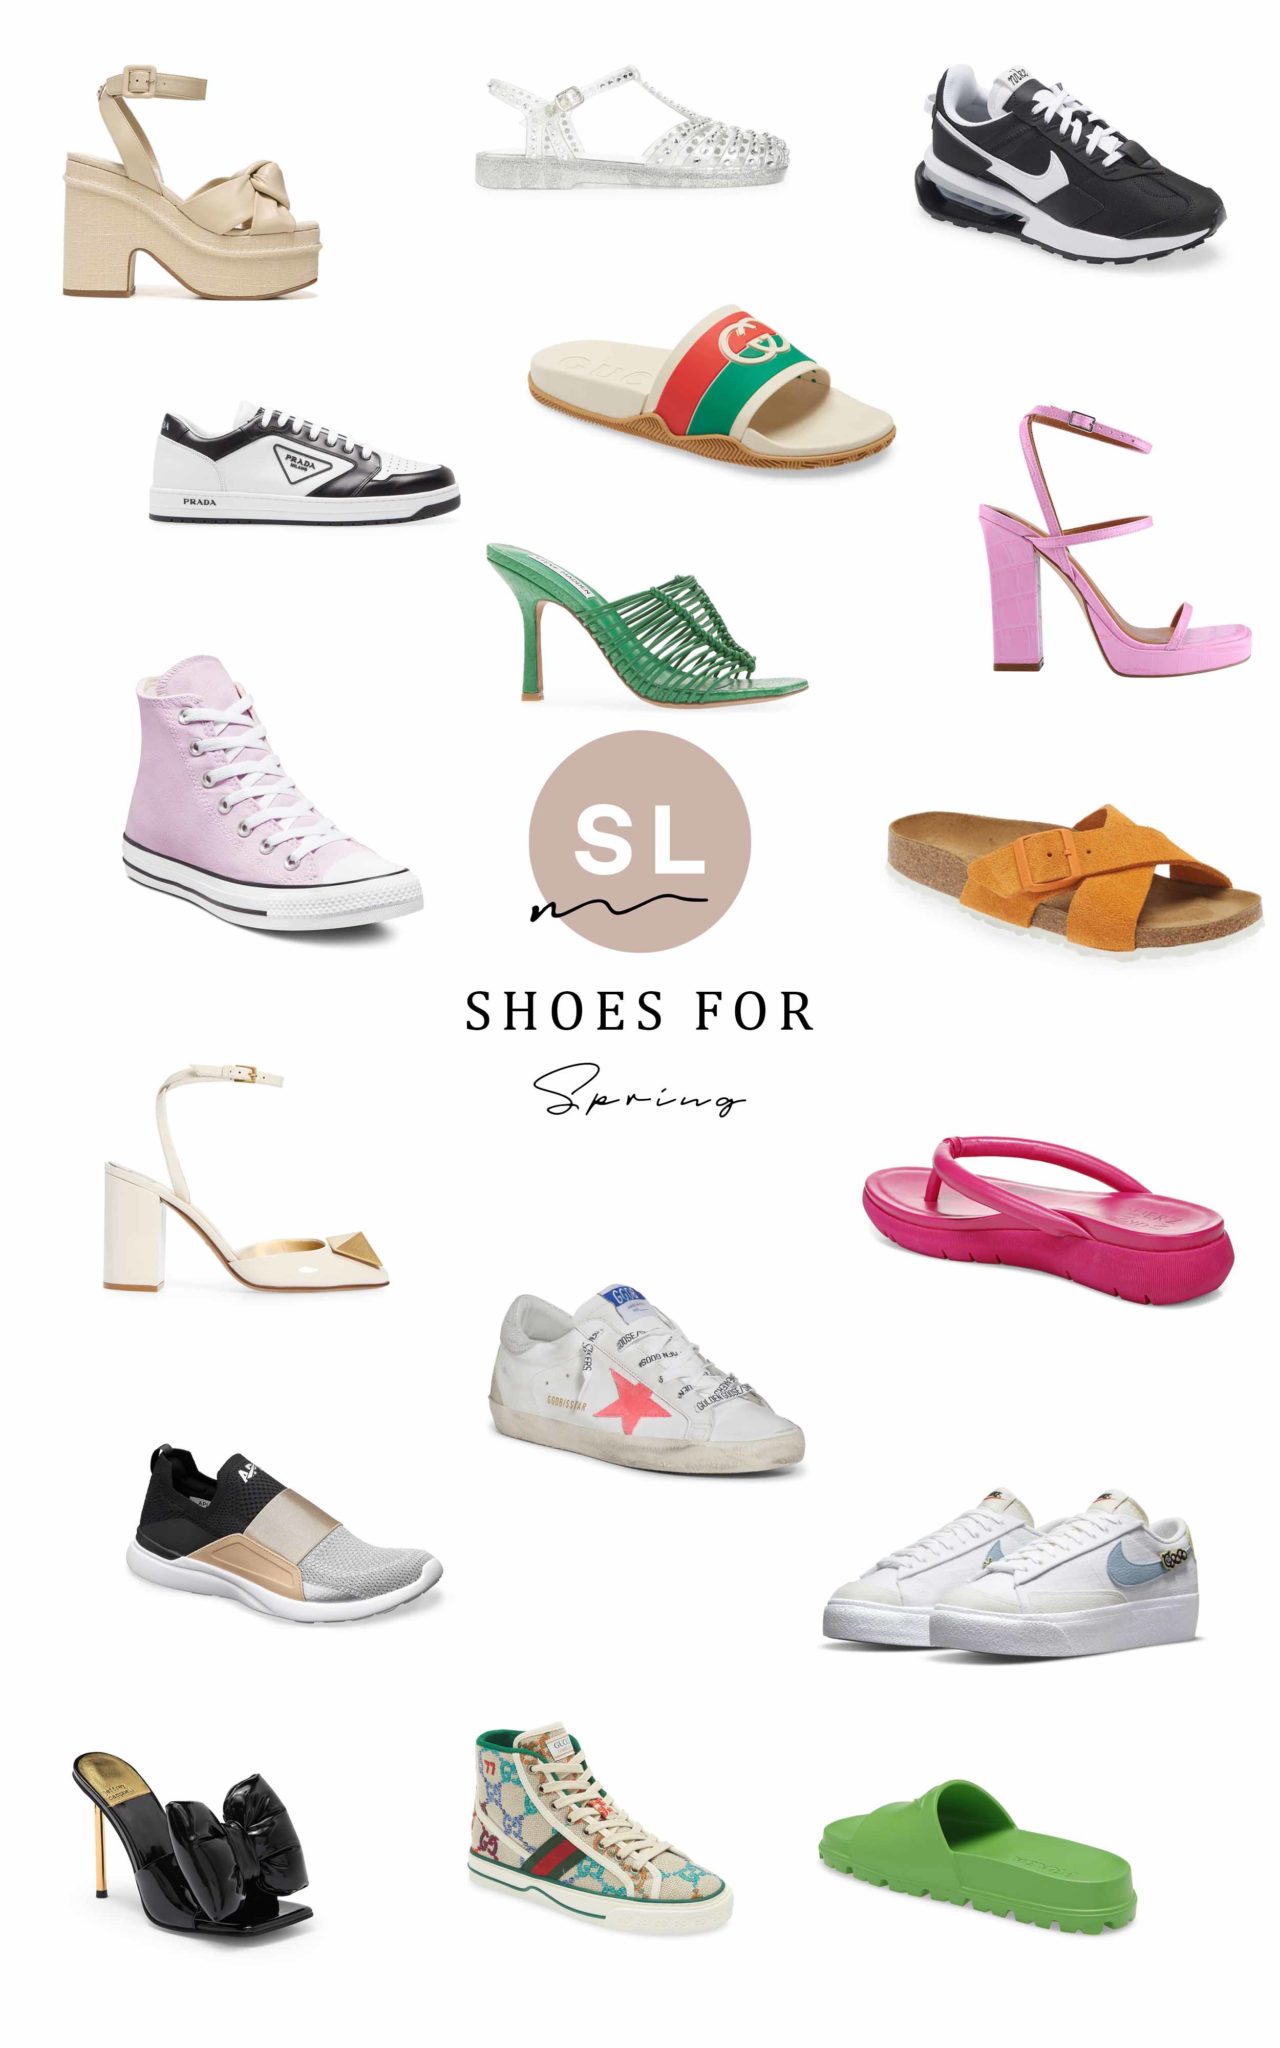 Shoes for Spring from Nordstrom